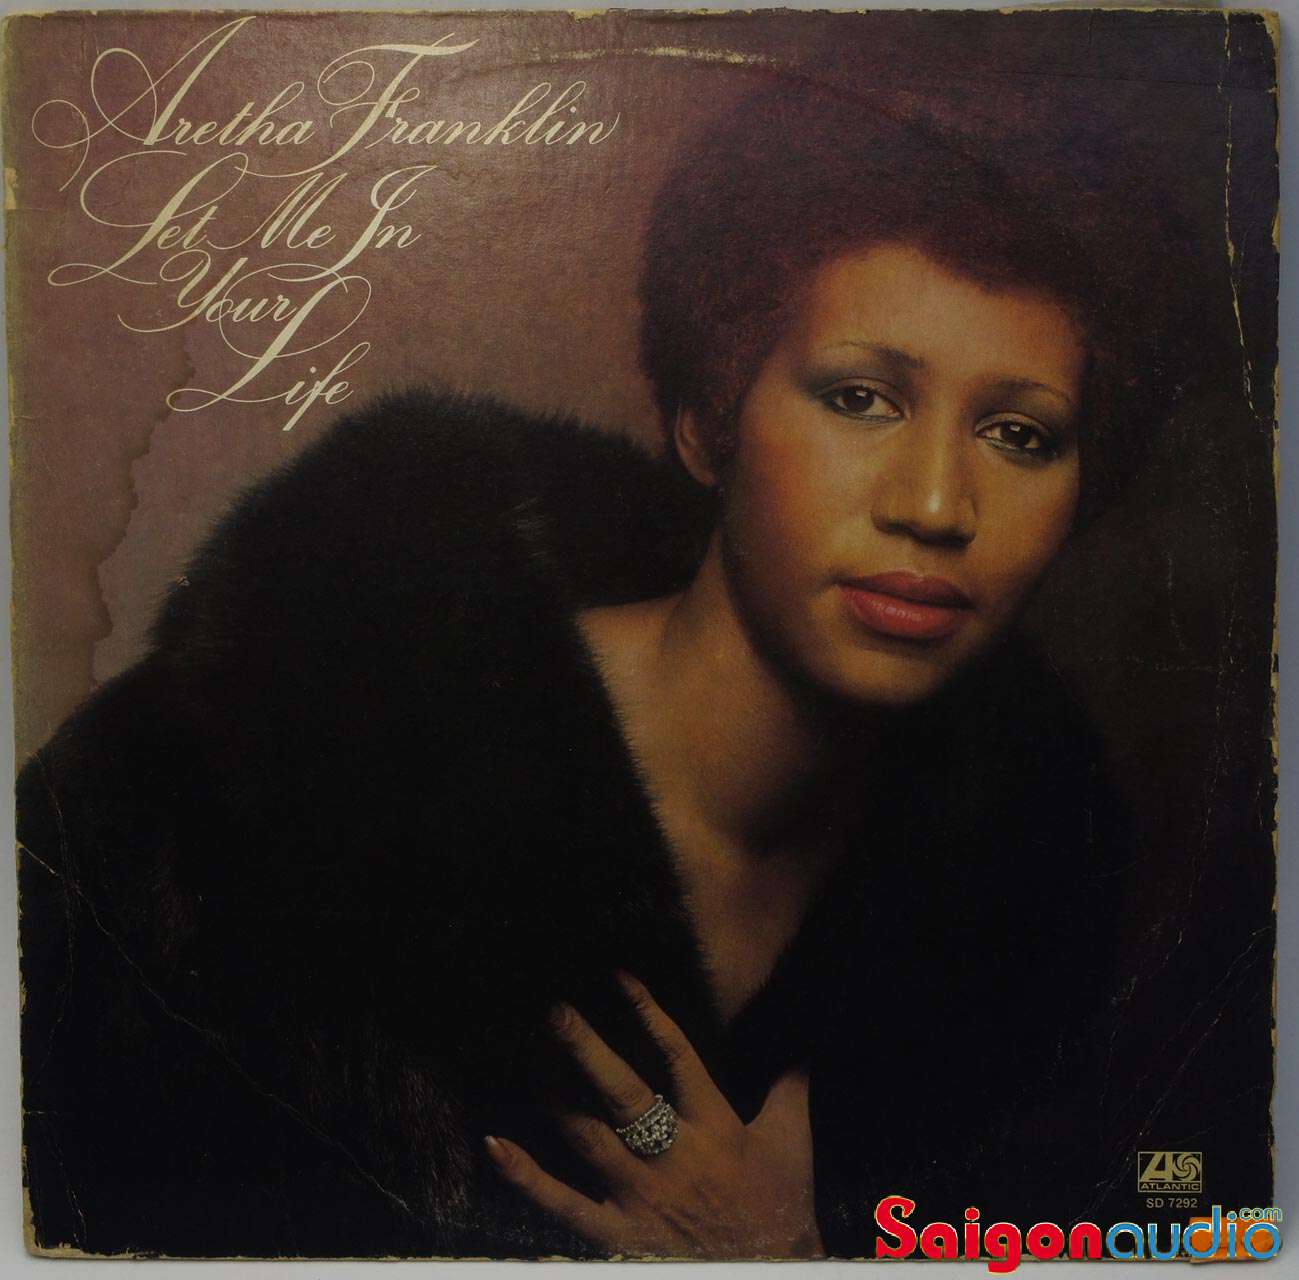 Đĩa than LP Aretha Franklin - Let Me In Your Life